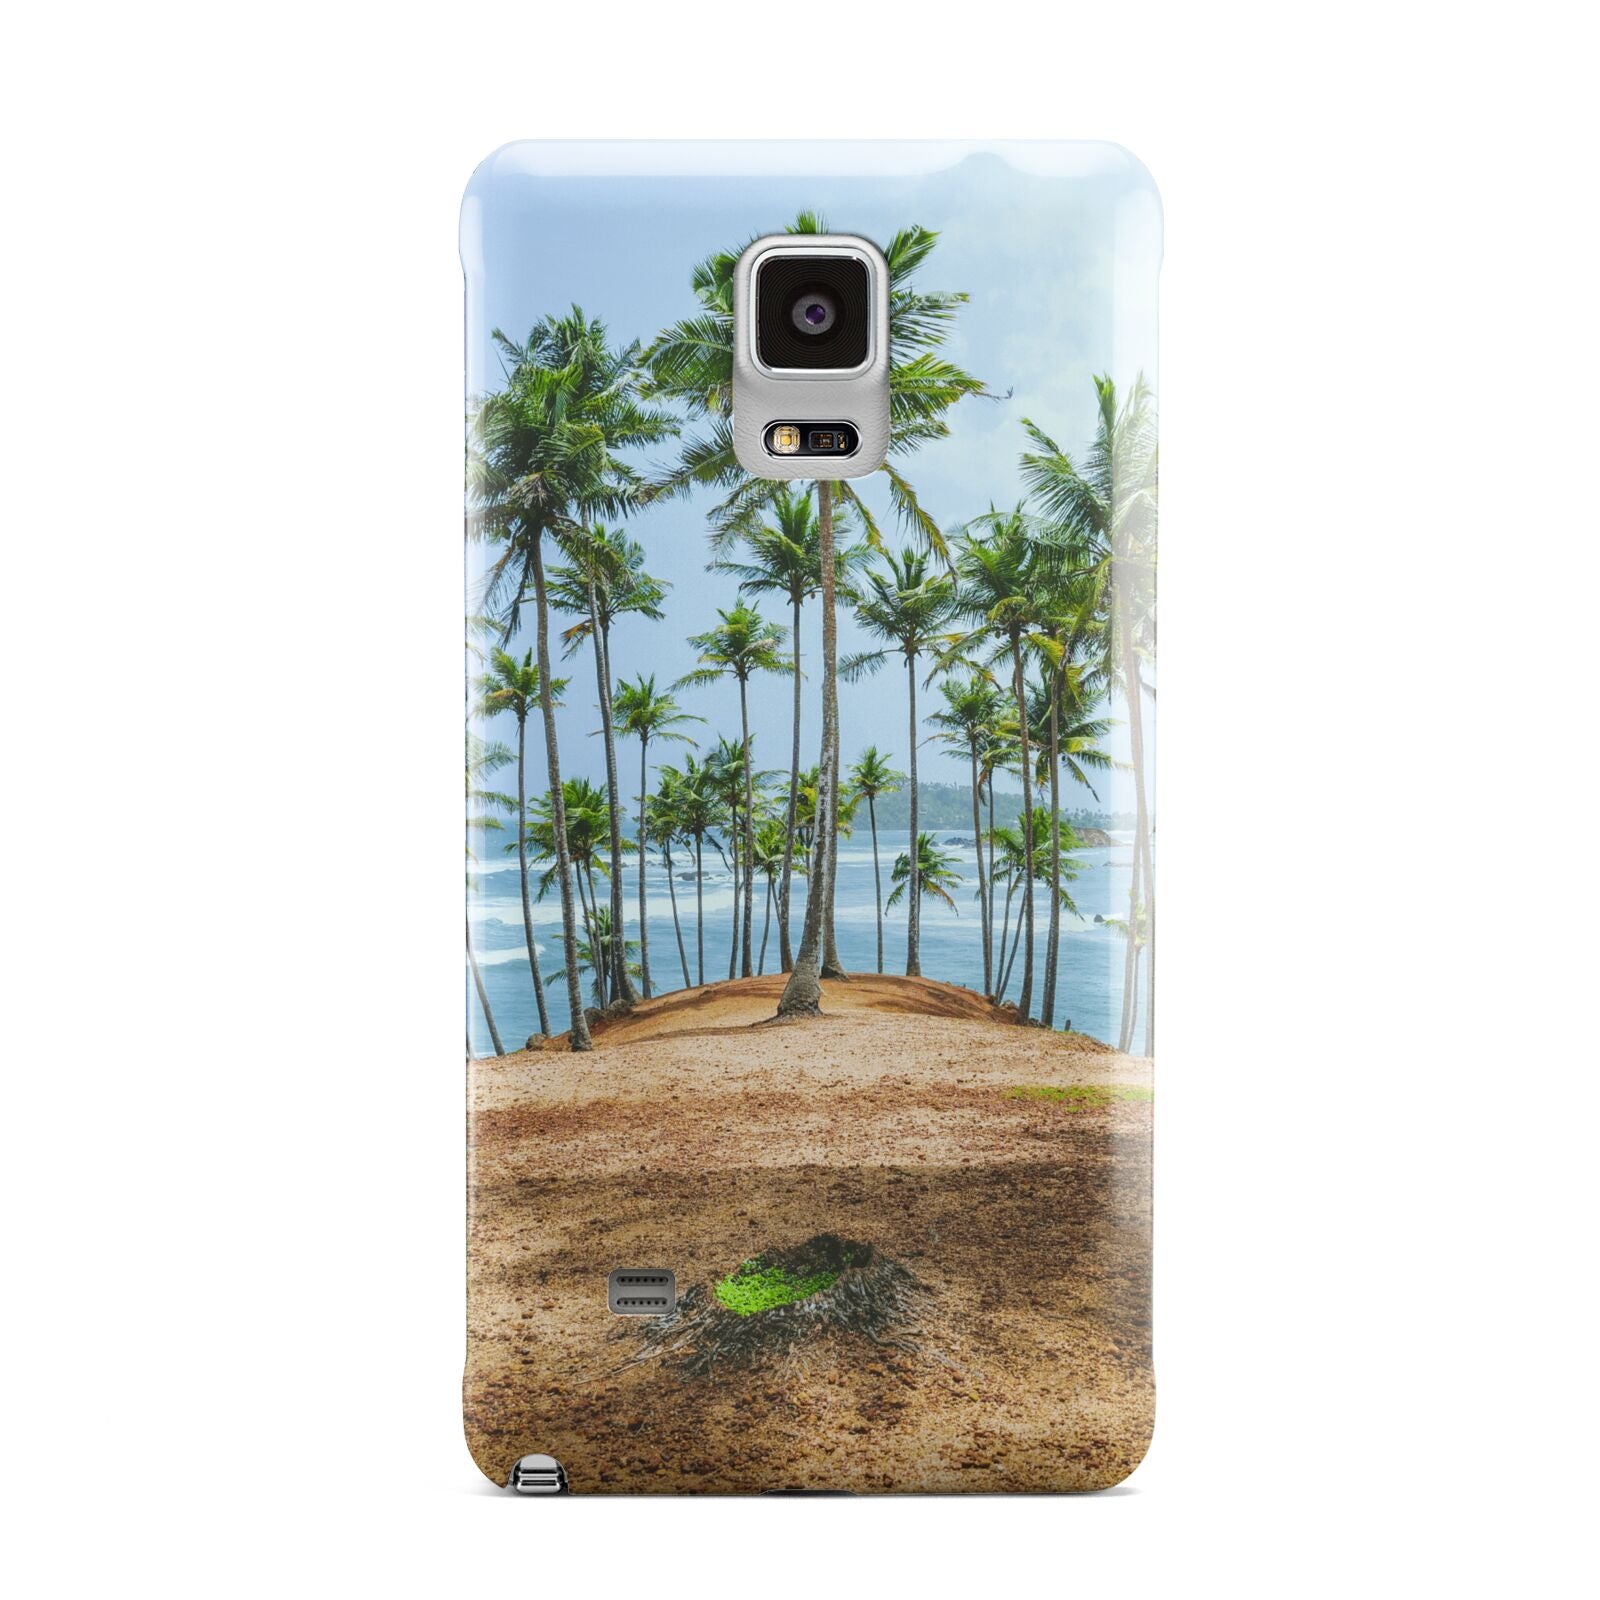 Palm Trees Samsung Galaxy Note 4 Case